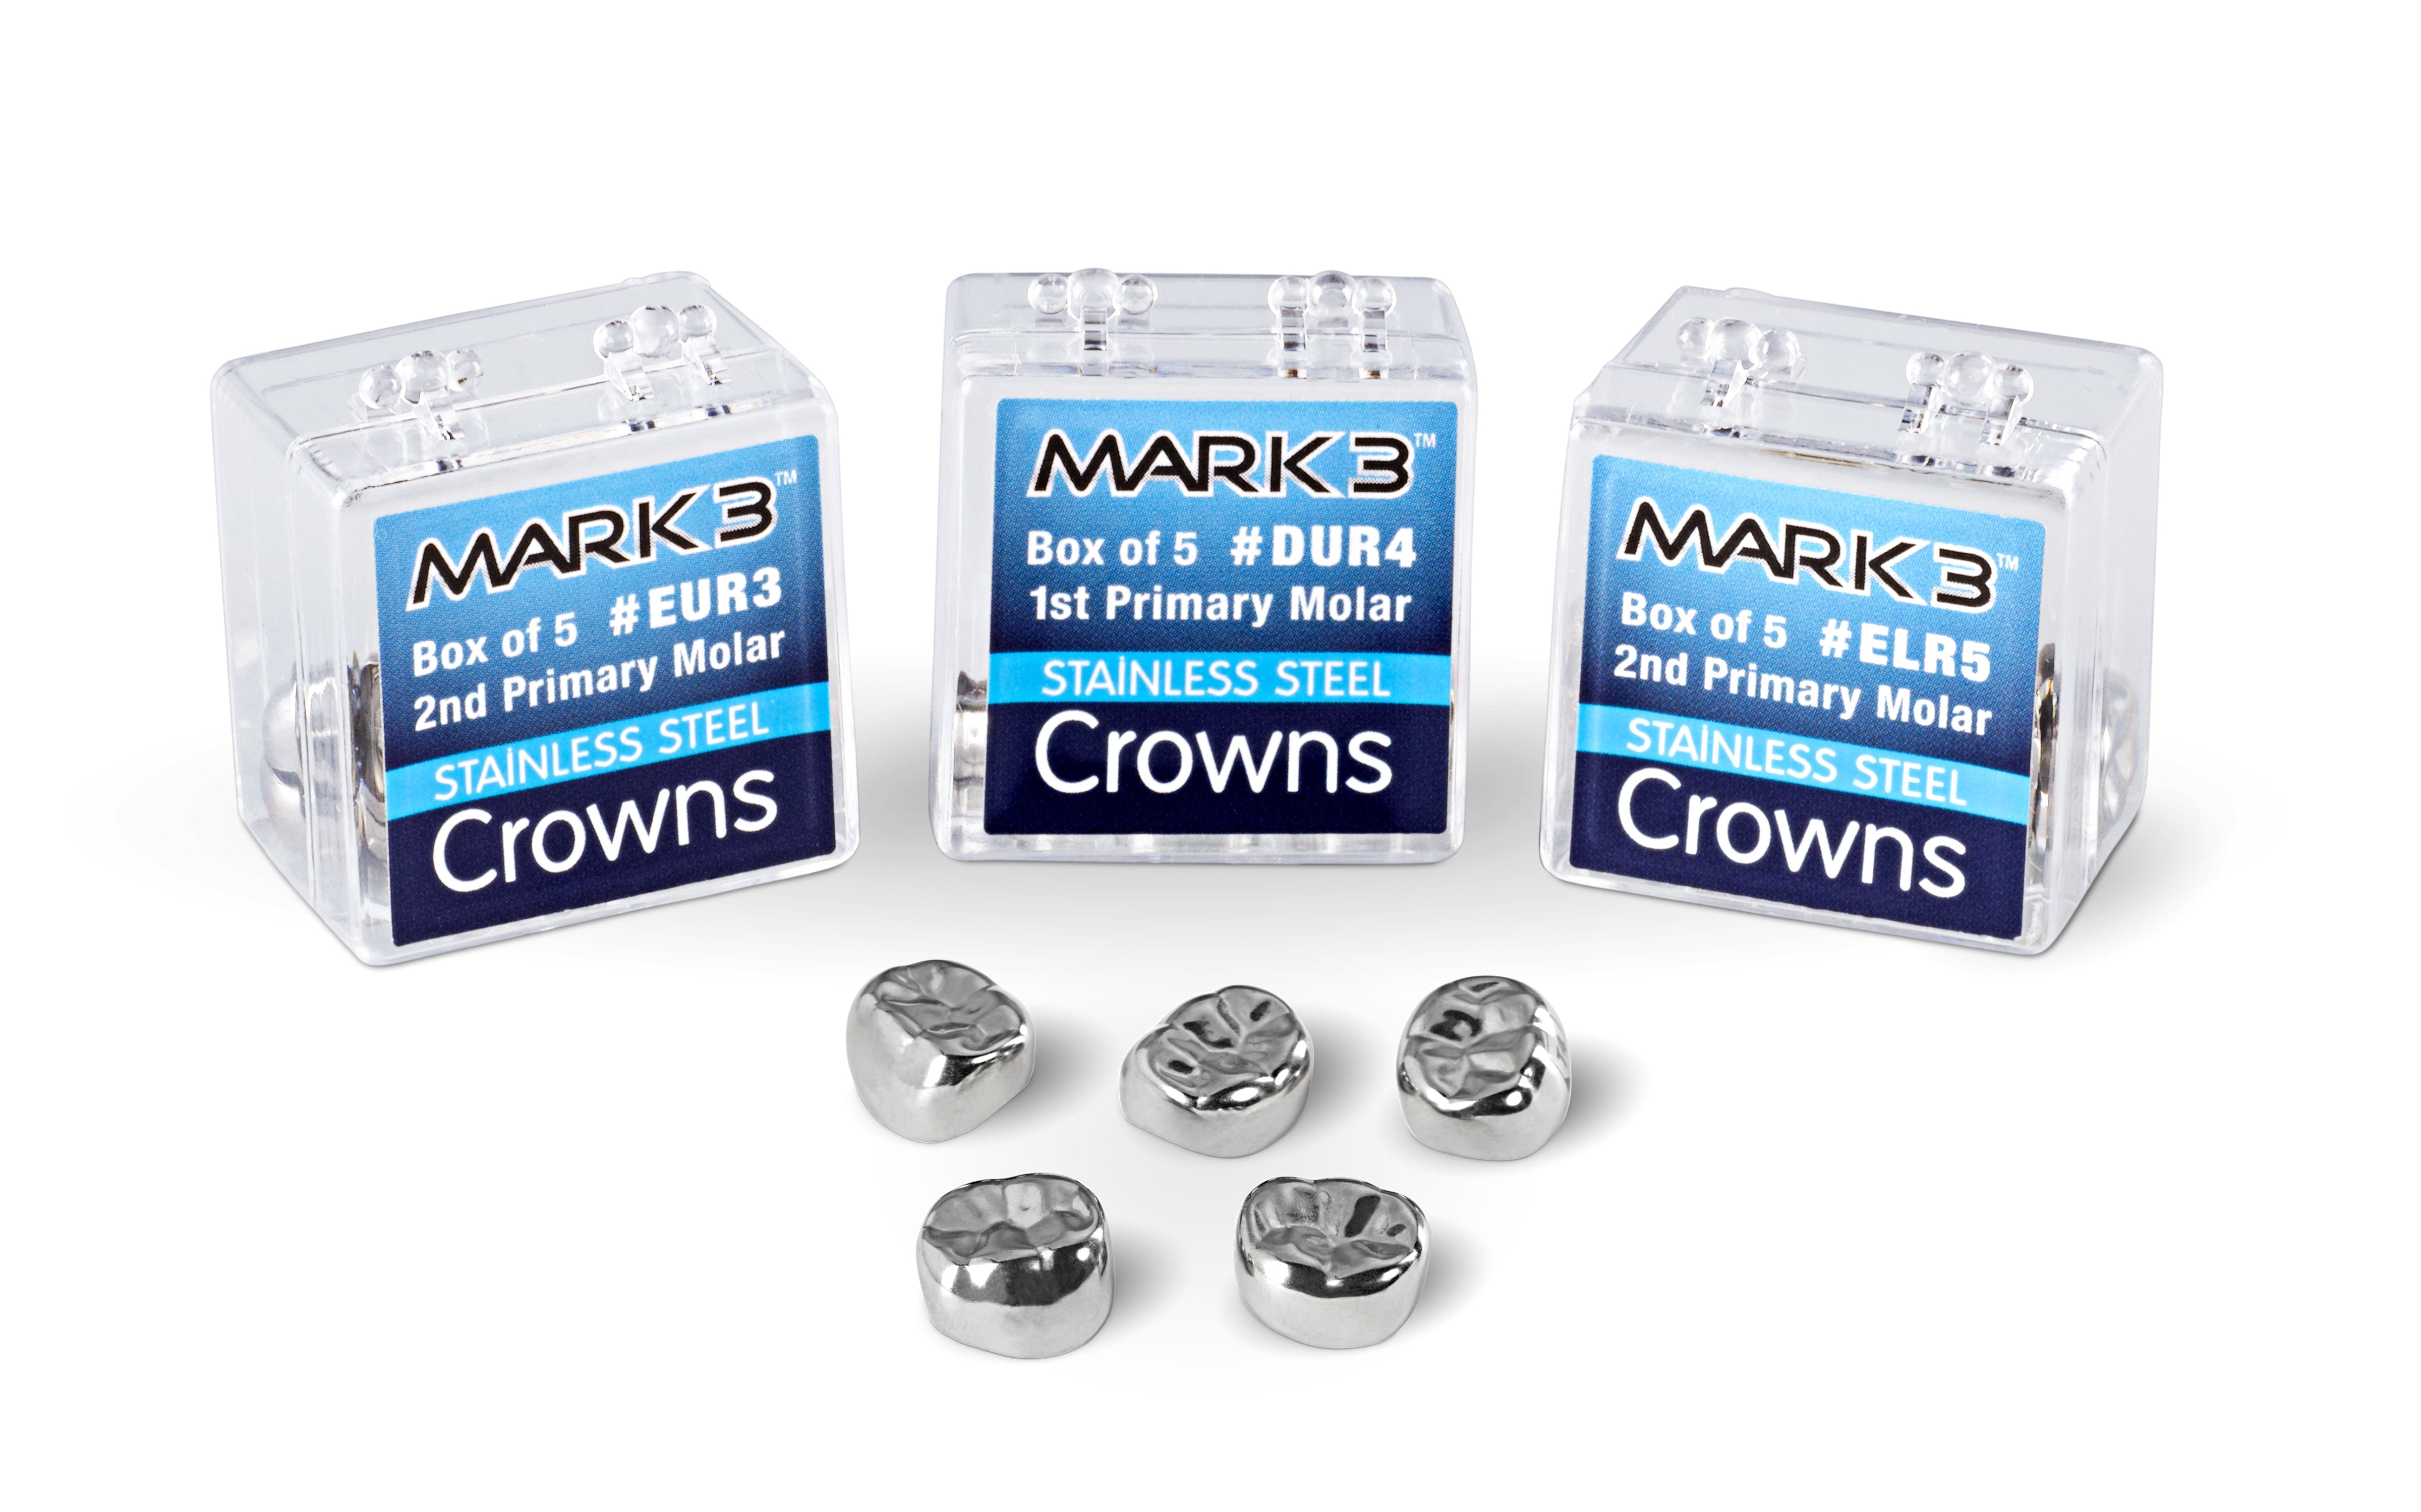 MARK3 2nd Primary Molar Crowns 5/pk